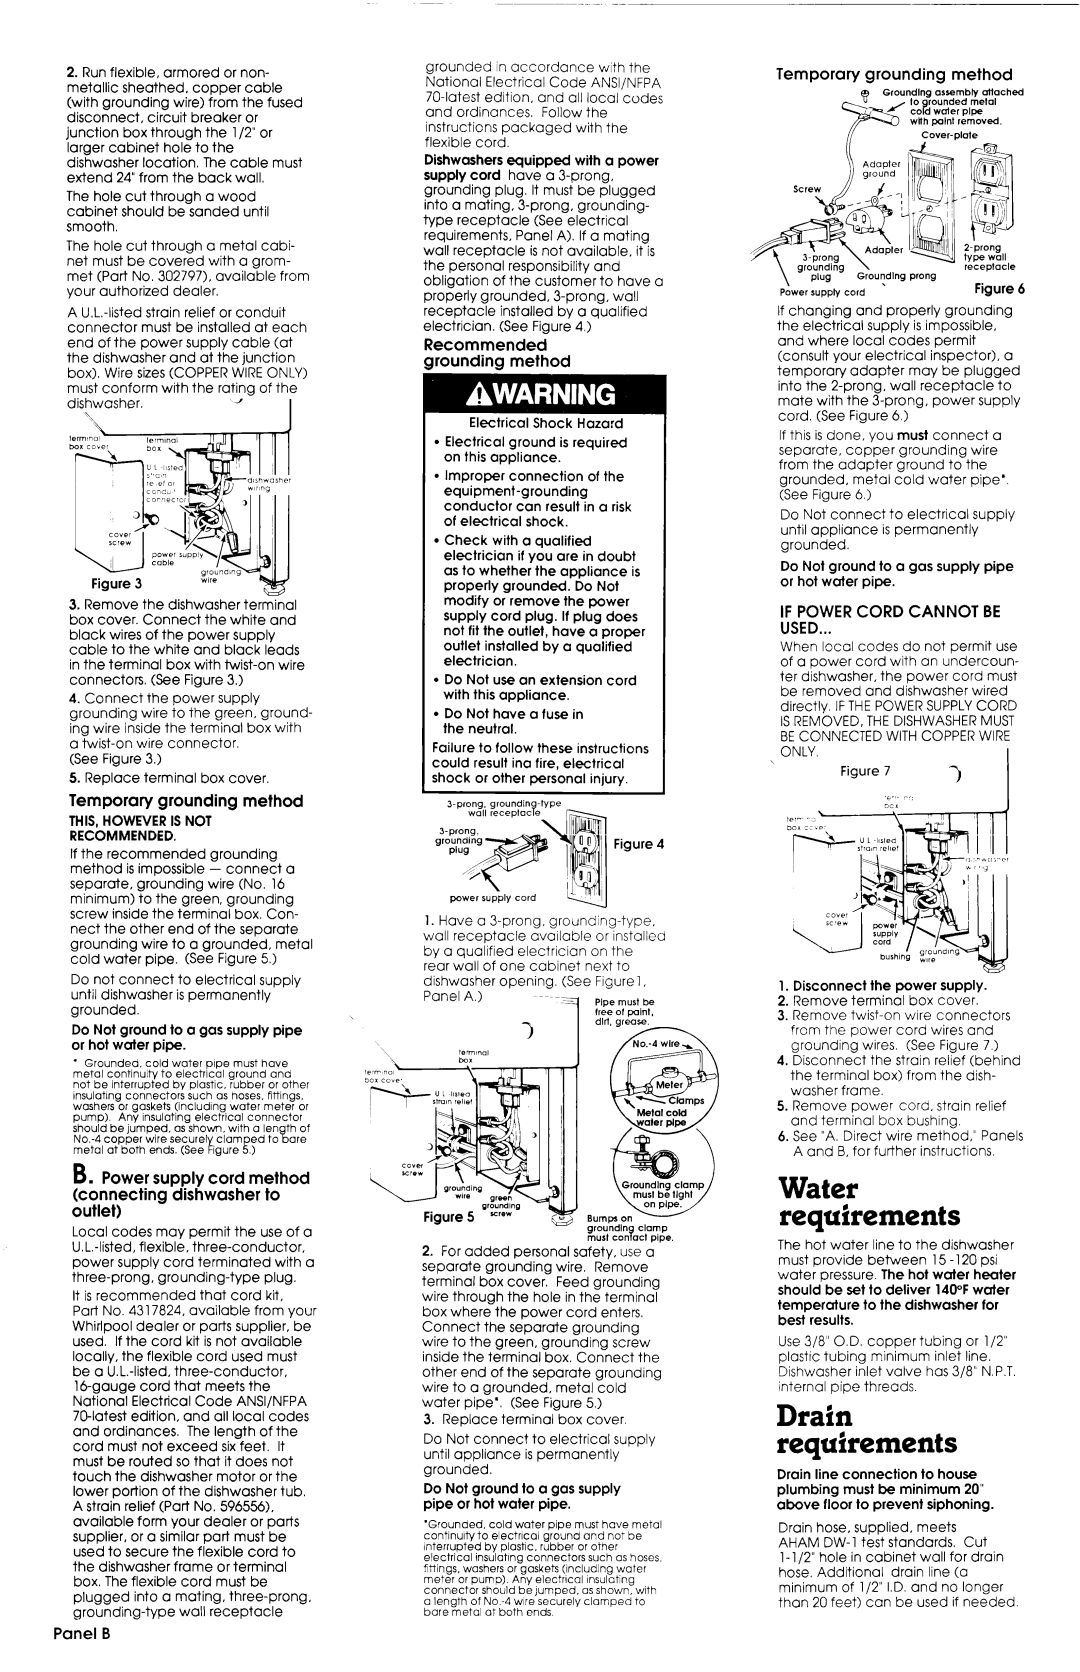 Whirlpool 3369089 Water requirements, Drain requirements, Temporary grounding method, Recommended Irounding method 